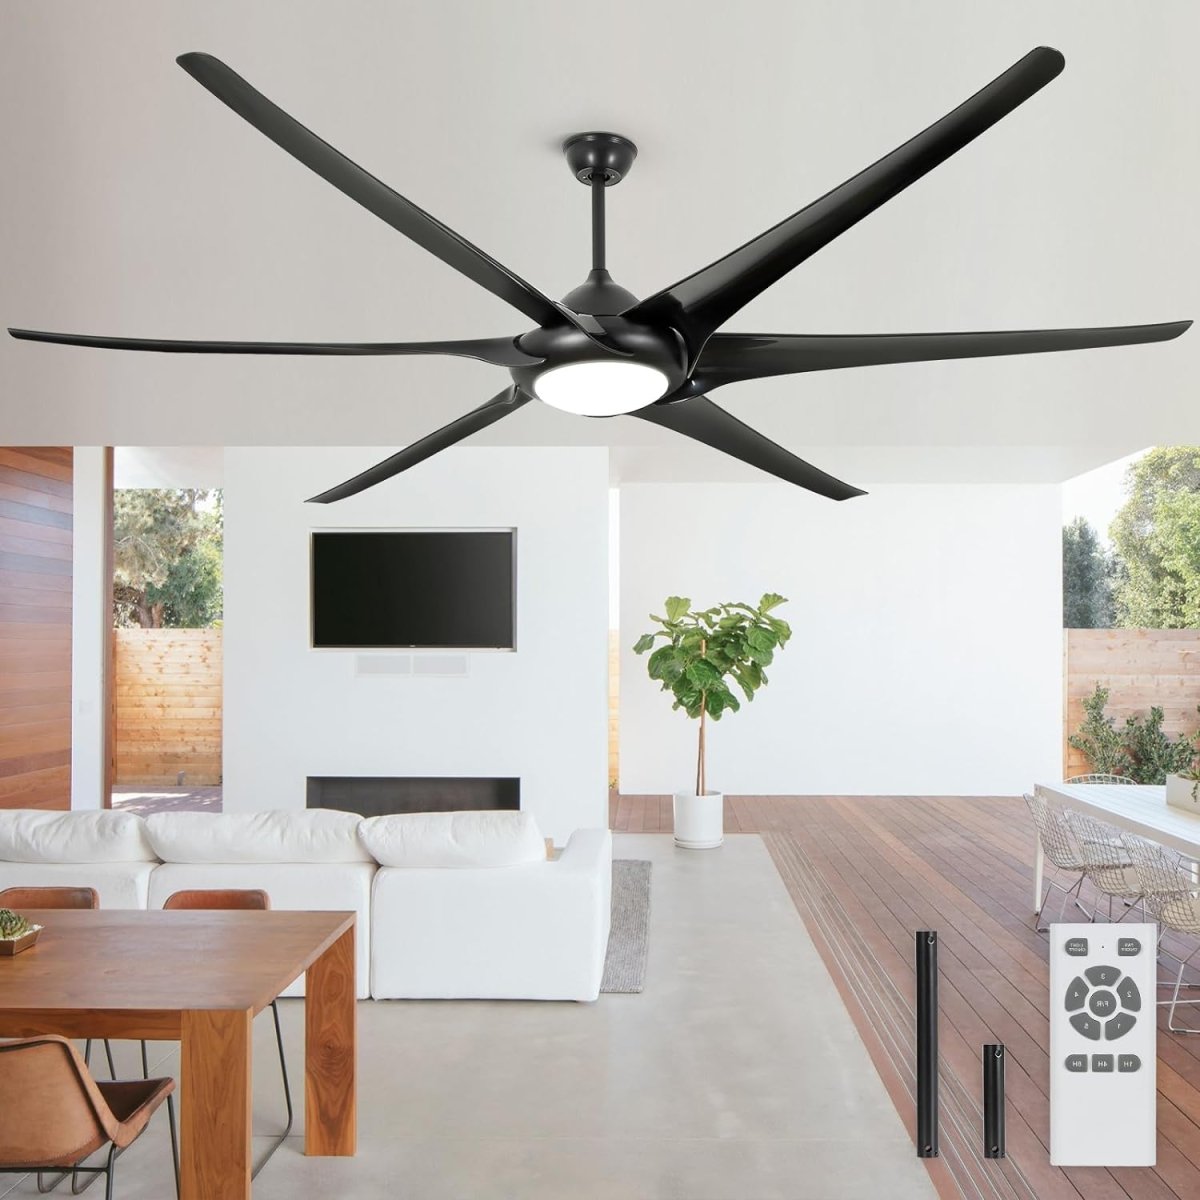 Depuley 100" Ceiling Fans with Lights and Remote, Large Black Ceiling Fan with Light LED, Modern Reversible Ceiling Fan with 5-Speed for Office & Covered Outdoor, Color Changeable 3000K-6000K, Timer - WS-FPZ34-24B 2 | DEPULEY